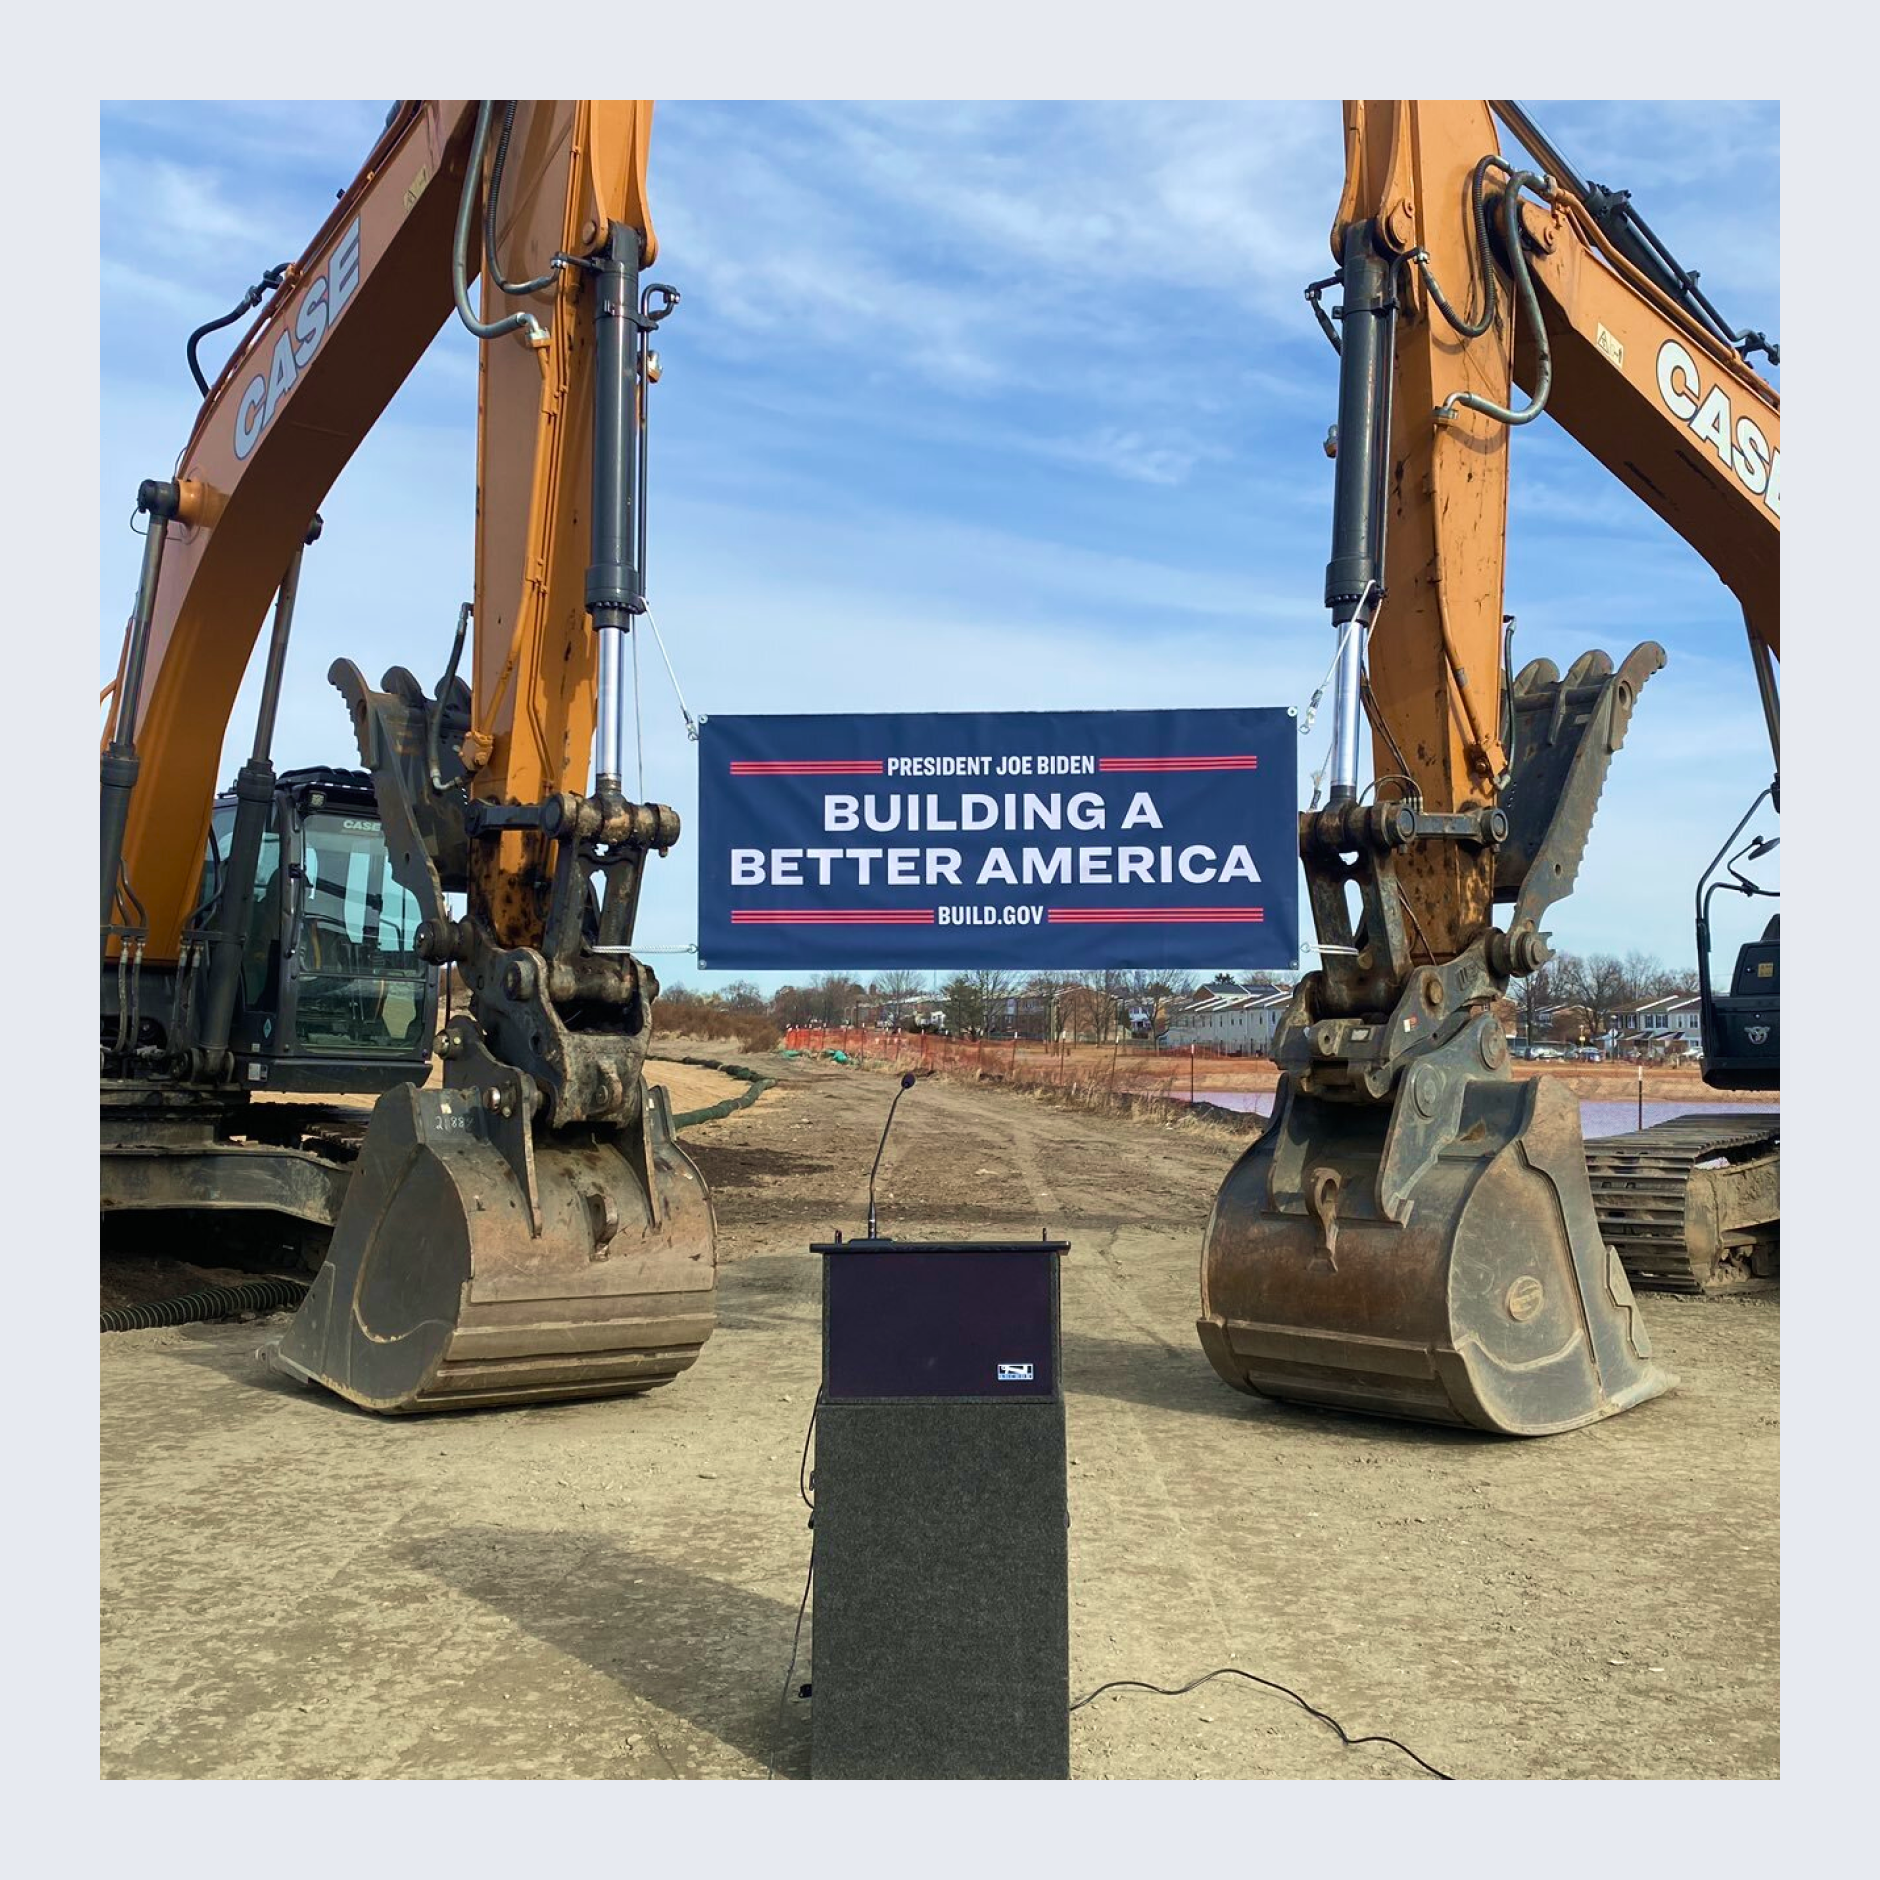 Building a Better America branding on a banner at a breaking ground ceremony